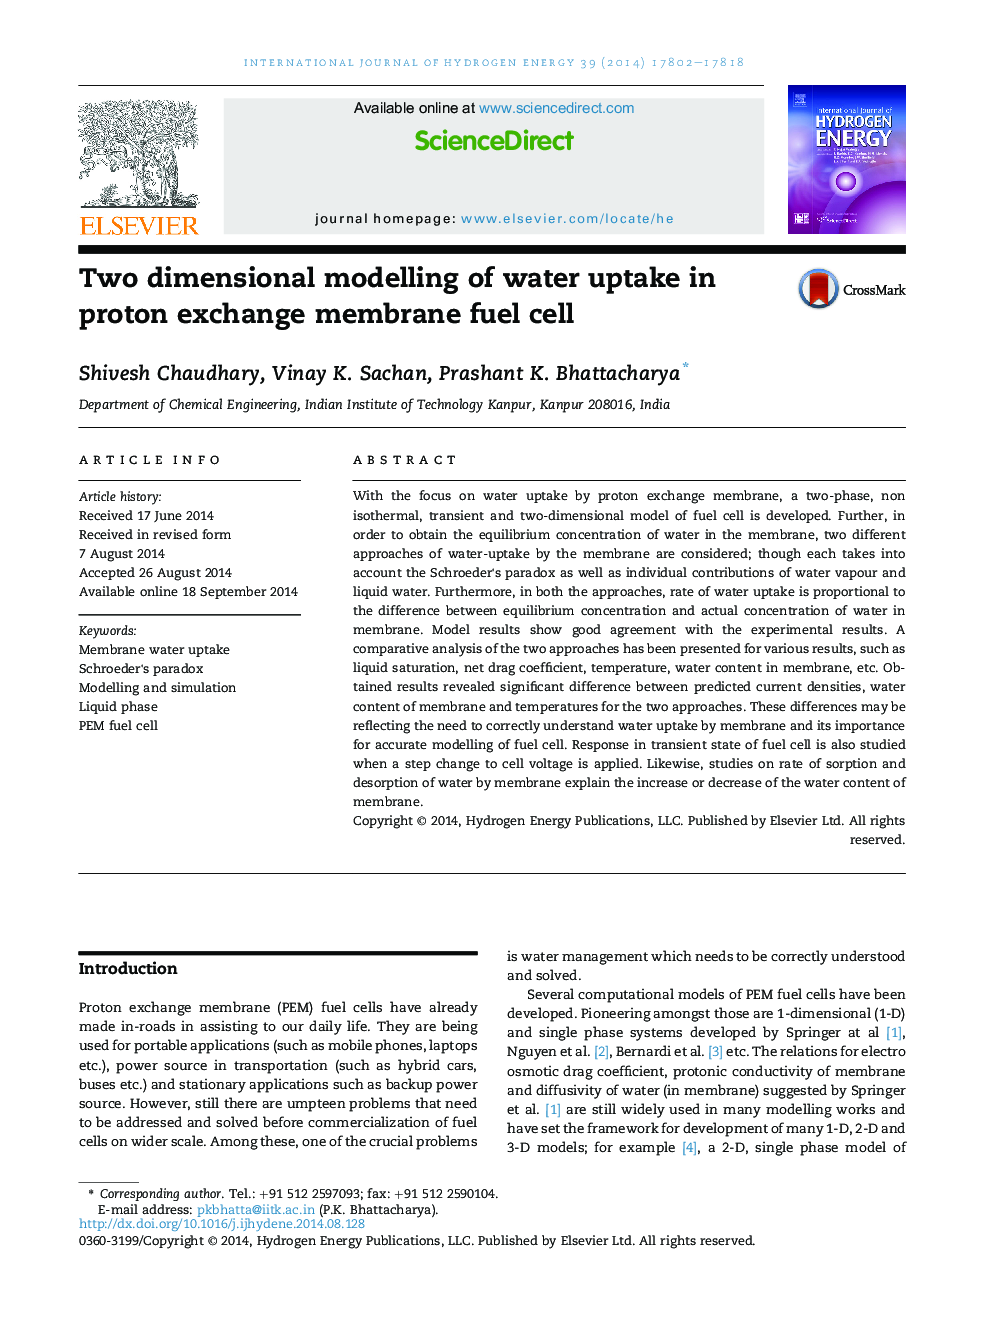 Two dimensional modelling of water uptake in proton exchange membrane fuel cell